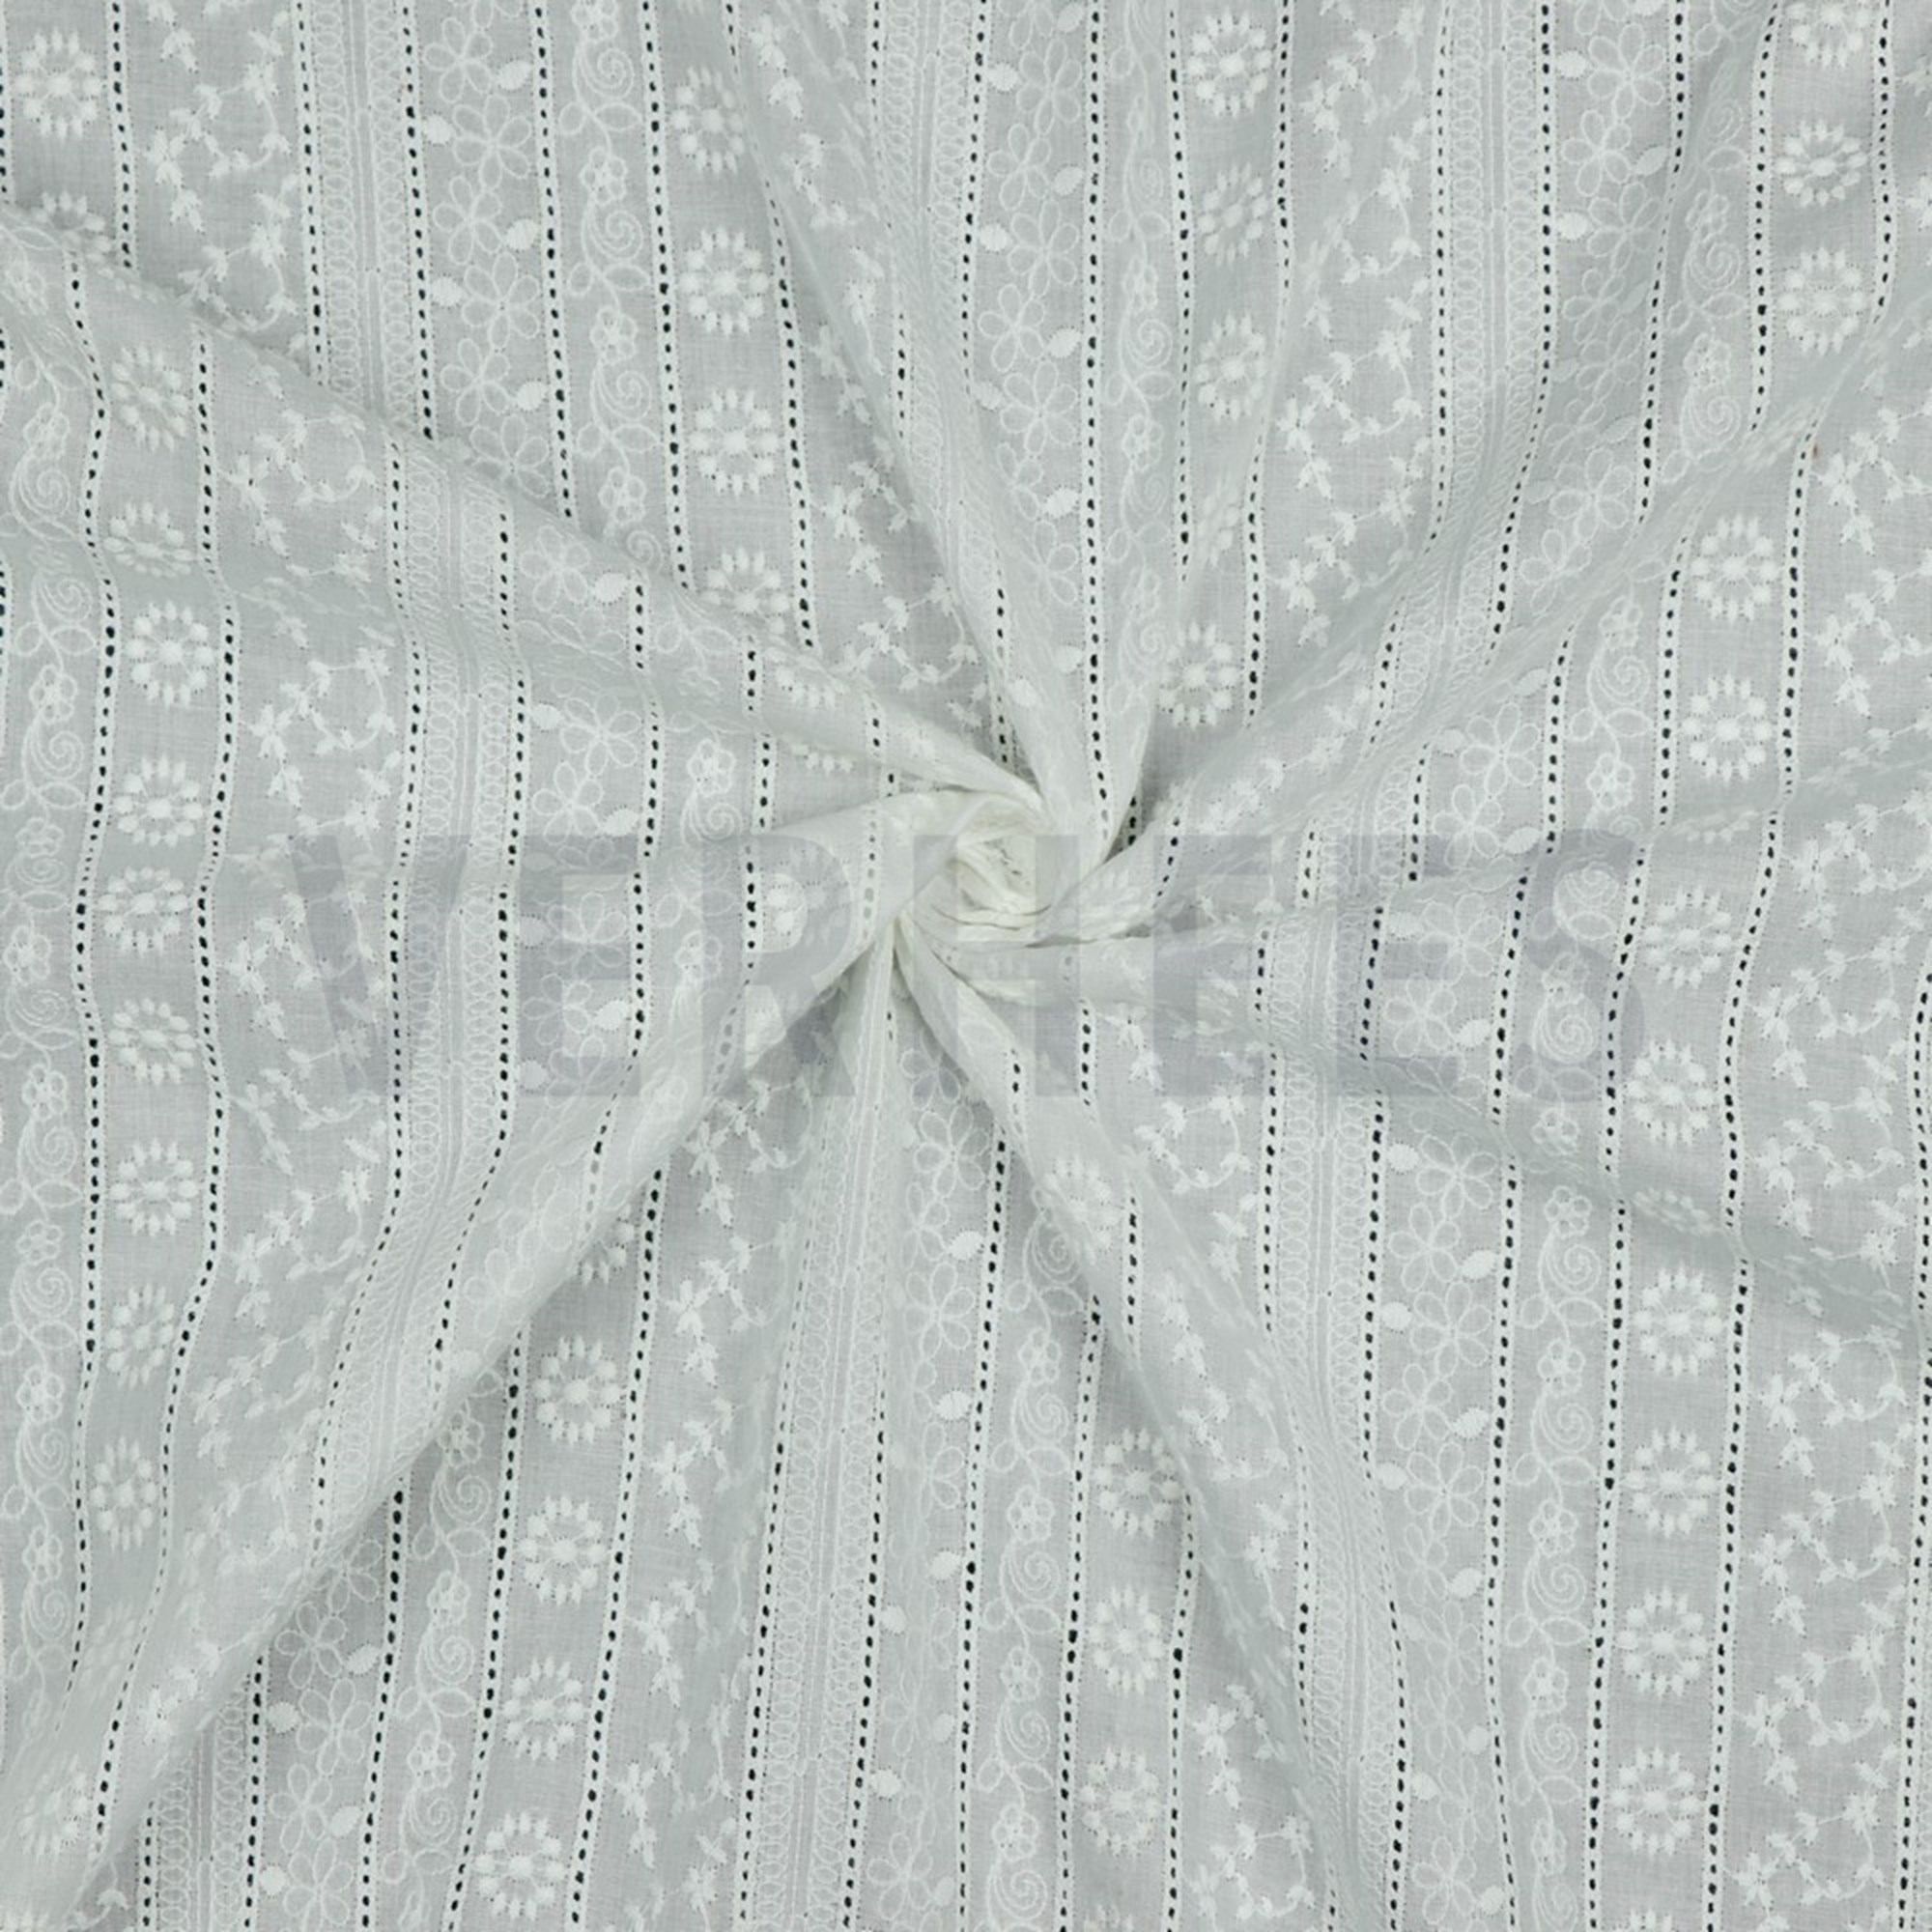 COTTON EMBROIDERY WHITE (high resolution) #2